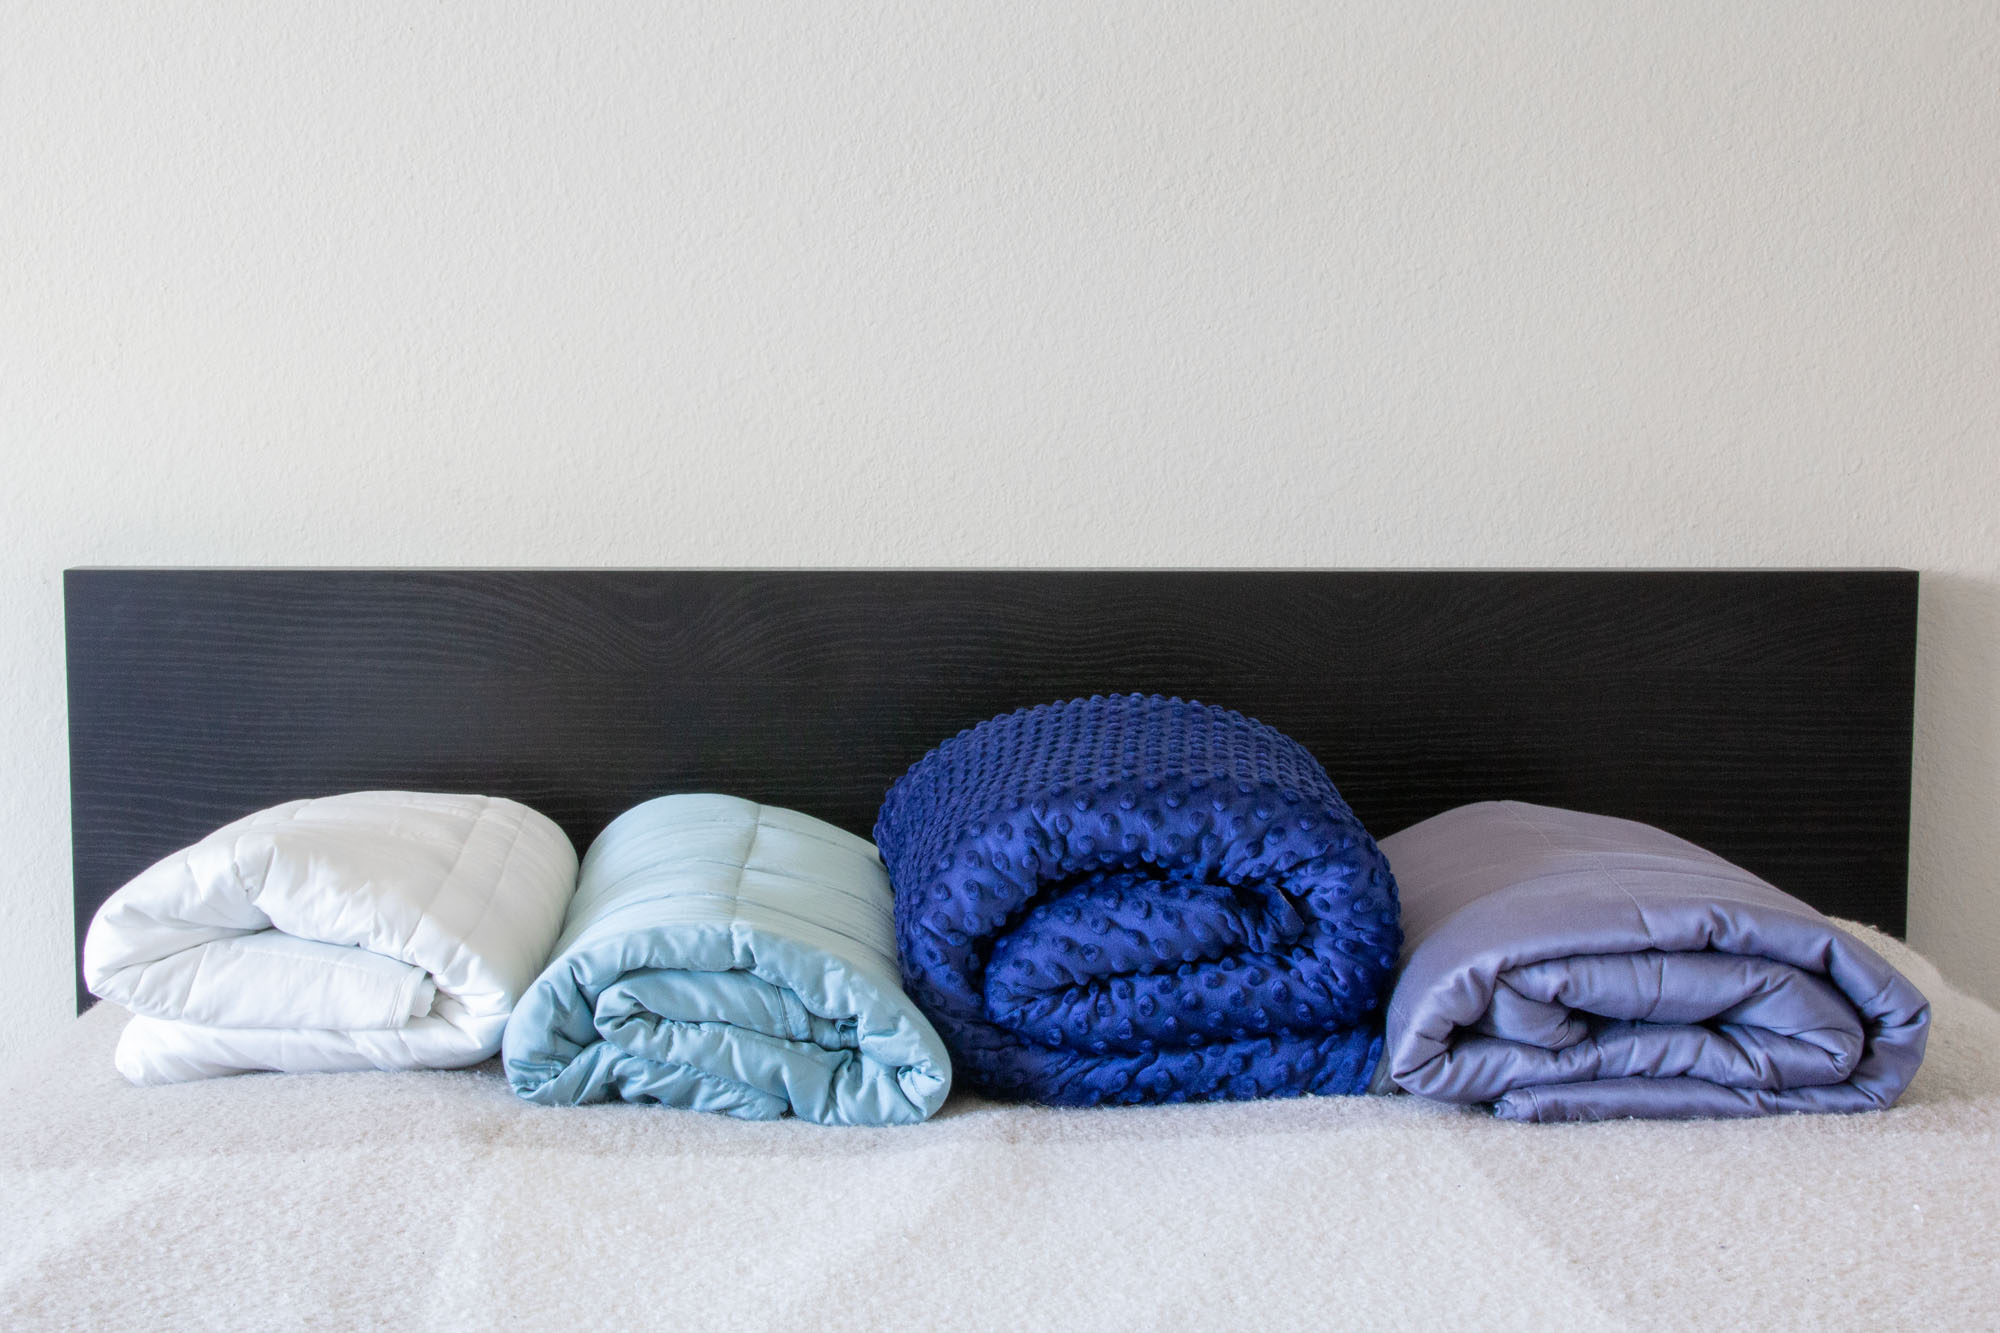 weighted blanket lineup